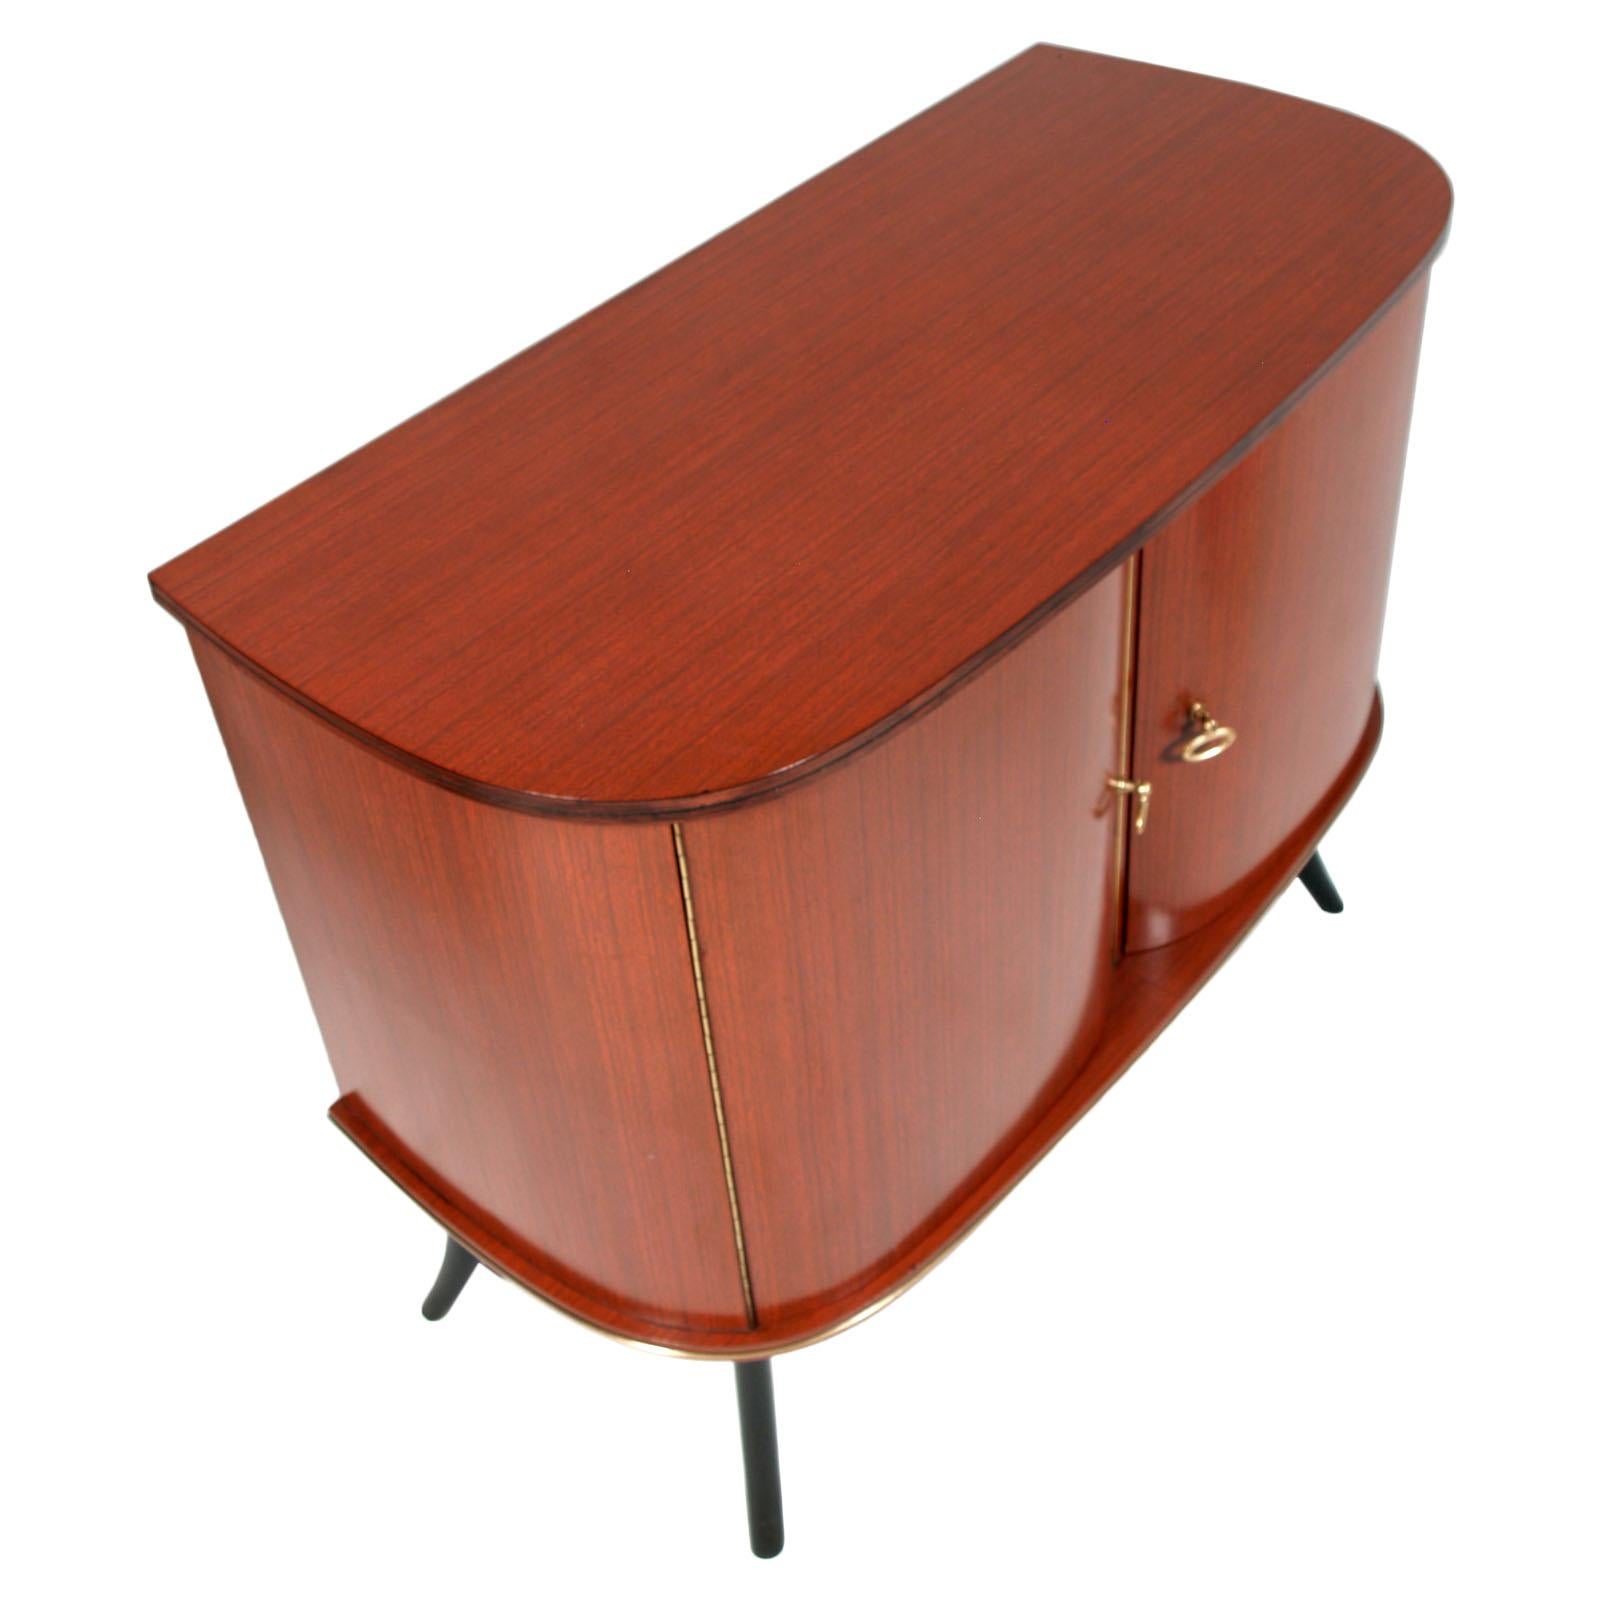 Mid-Century Modern cabinet dry bar by Cantù, Paolo Buffa attributed , in veneered mahogany external, faux marble and walnut , with internal working lighting. Handles in golden brass.

Measures cm: H 73, W 92, D 45 (internal H 44cm left or H 35cm